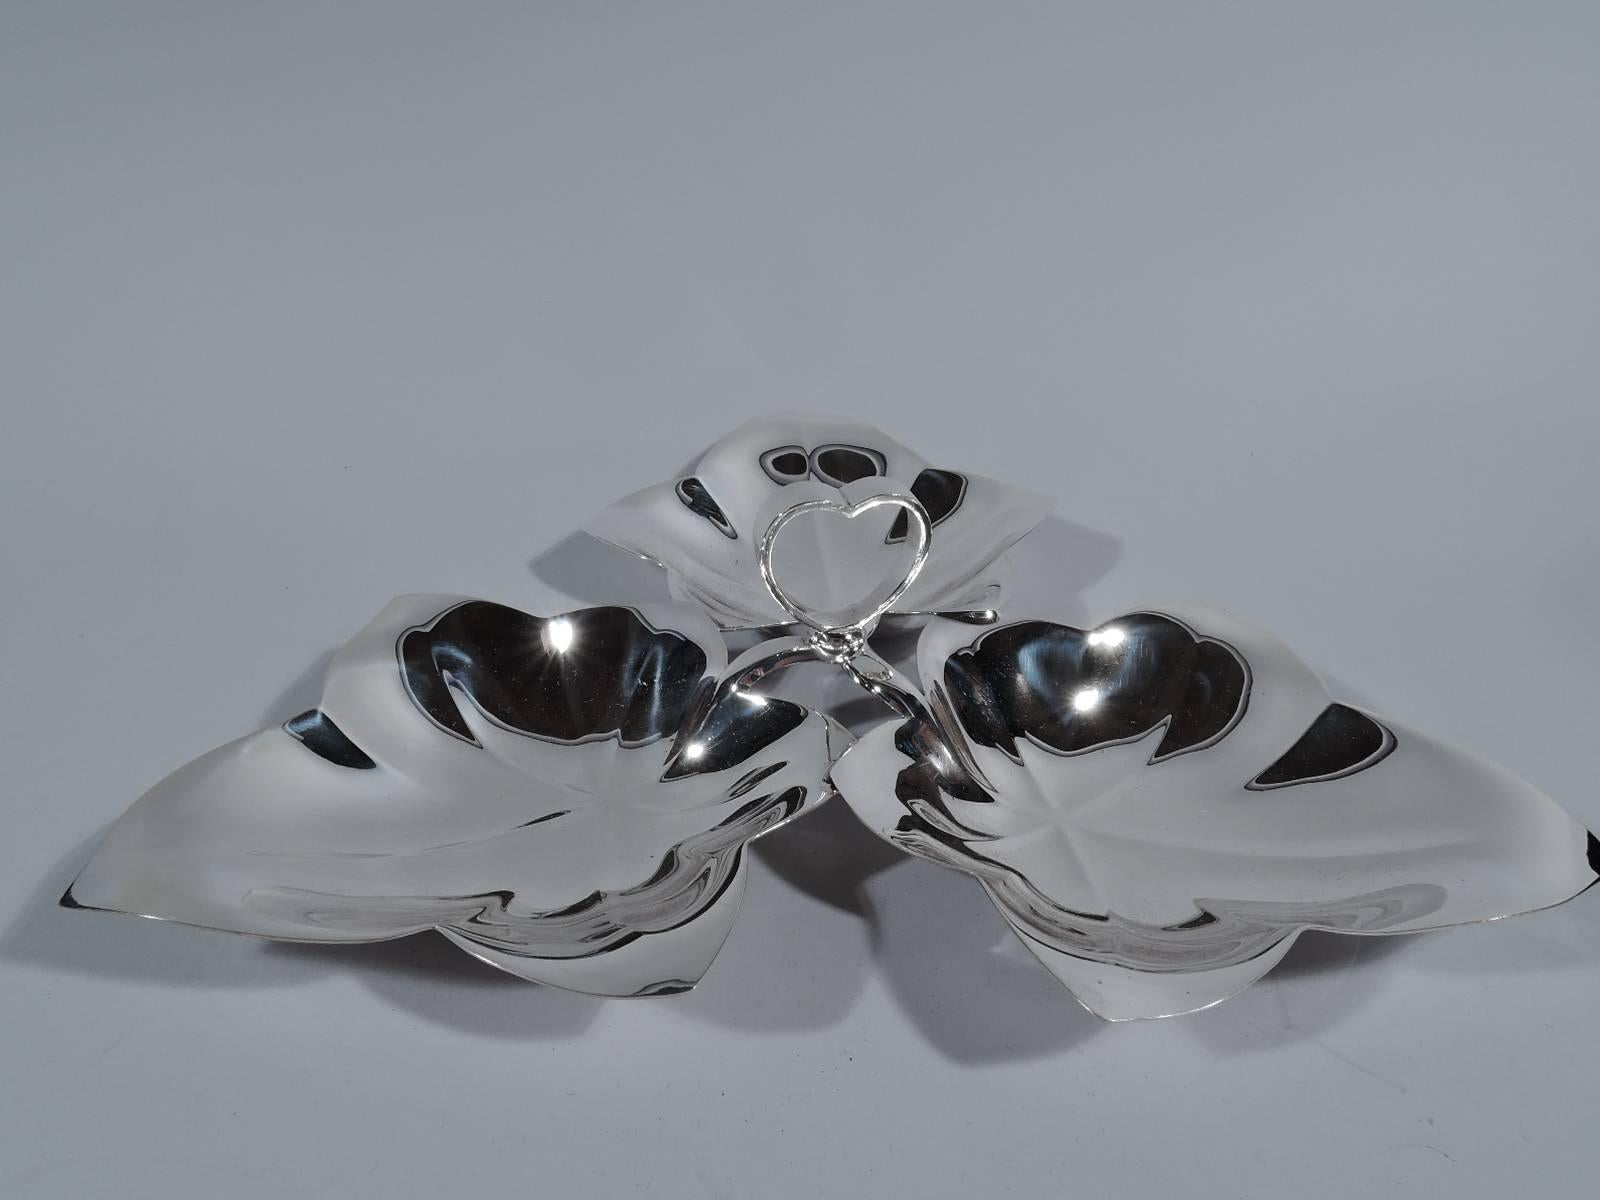 Midcentury sterling silver three-leaf condiment server. Made by Tiffany & Co. in New York. Three veined five-point leaves joined at stem with open heart handle. A playful, informal design by the dowager duchess of American silver. Hallmark includes